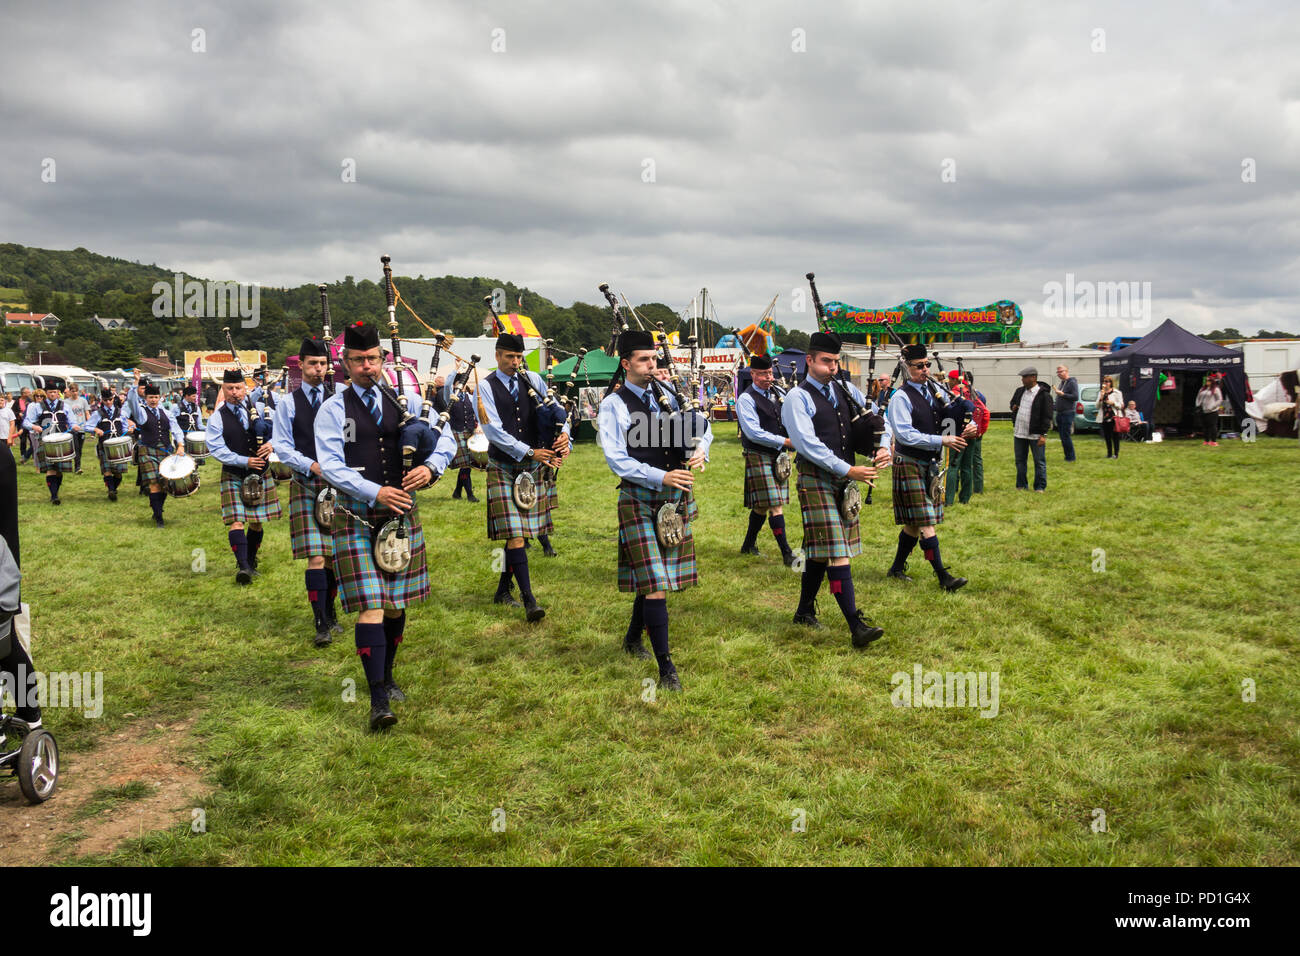 Stirling, Scotland, UK. 5th August 2018. Strathallan Games Park near Stirling is the venue for the 167th Bridge of Allan Highland Games.  Members of the Royal Burgh of Stirling Pipe Band play traditional Scottish bagpipes and drums as they march across the showground. In competions like today they wear their number 2 uniform with the Stirling and Bannockburn Caledonian Society tartan. Credit Joseph Clemson, JY News Images/Alamy Live News. Stock Photo